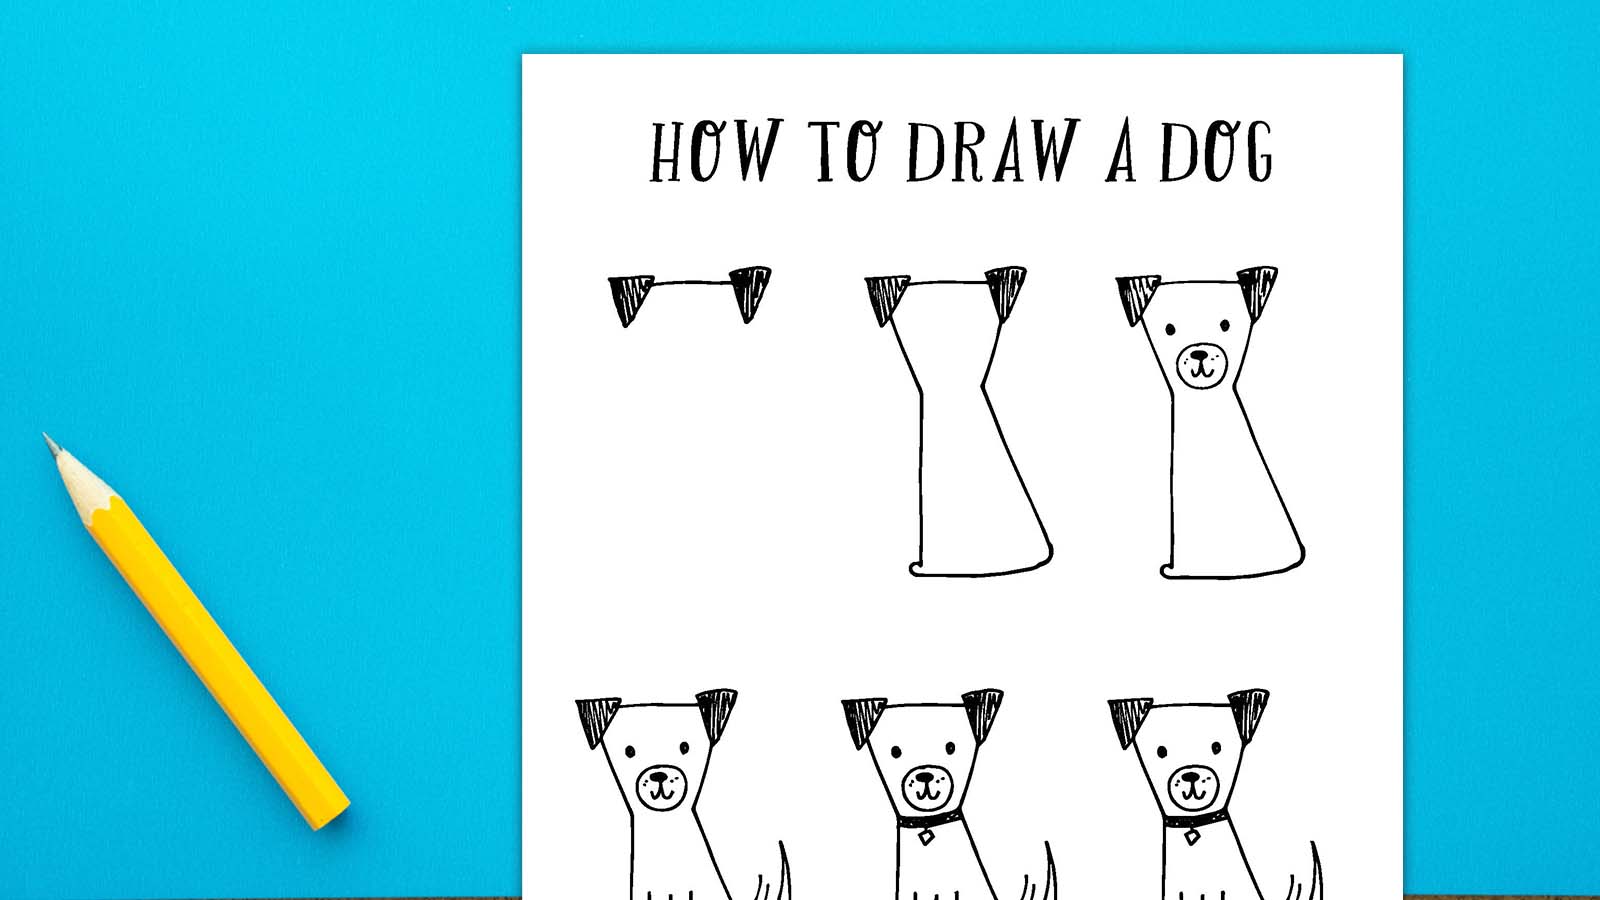 A blue background has a white piece of paper on it that says How to Draw a Dog. Six steps are shown for drawing the dog. A pencil is also shown.